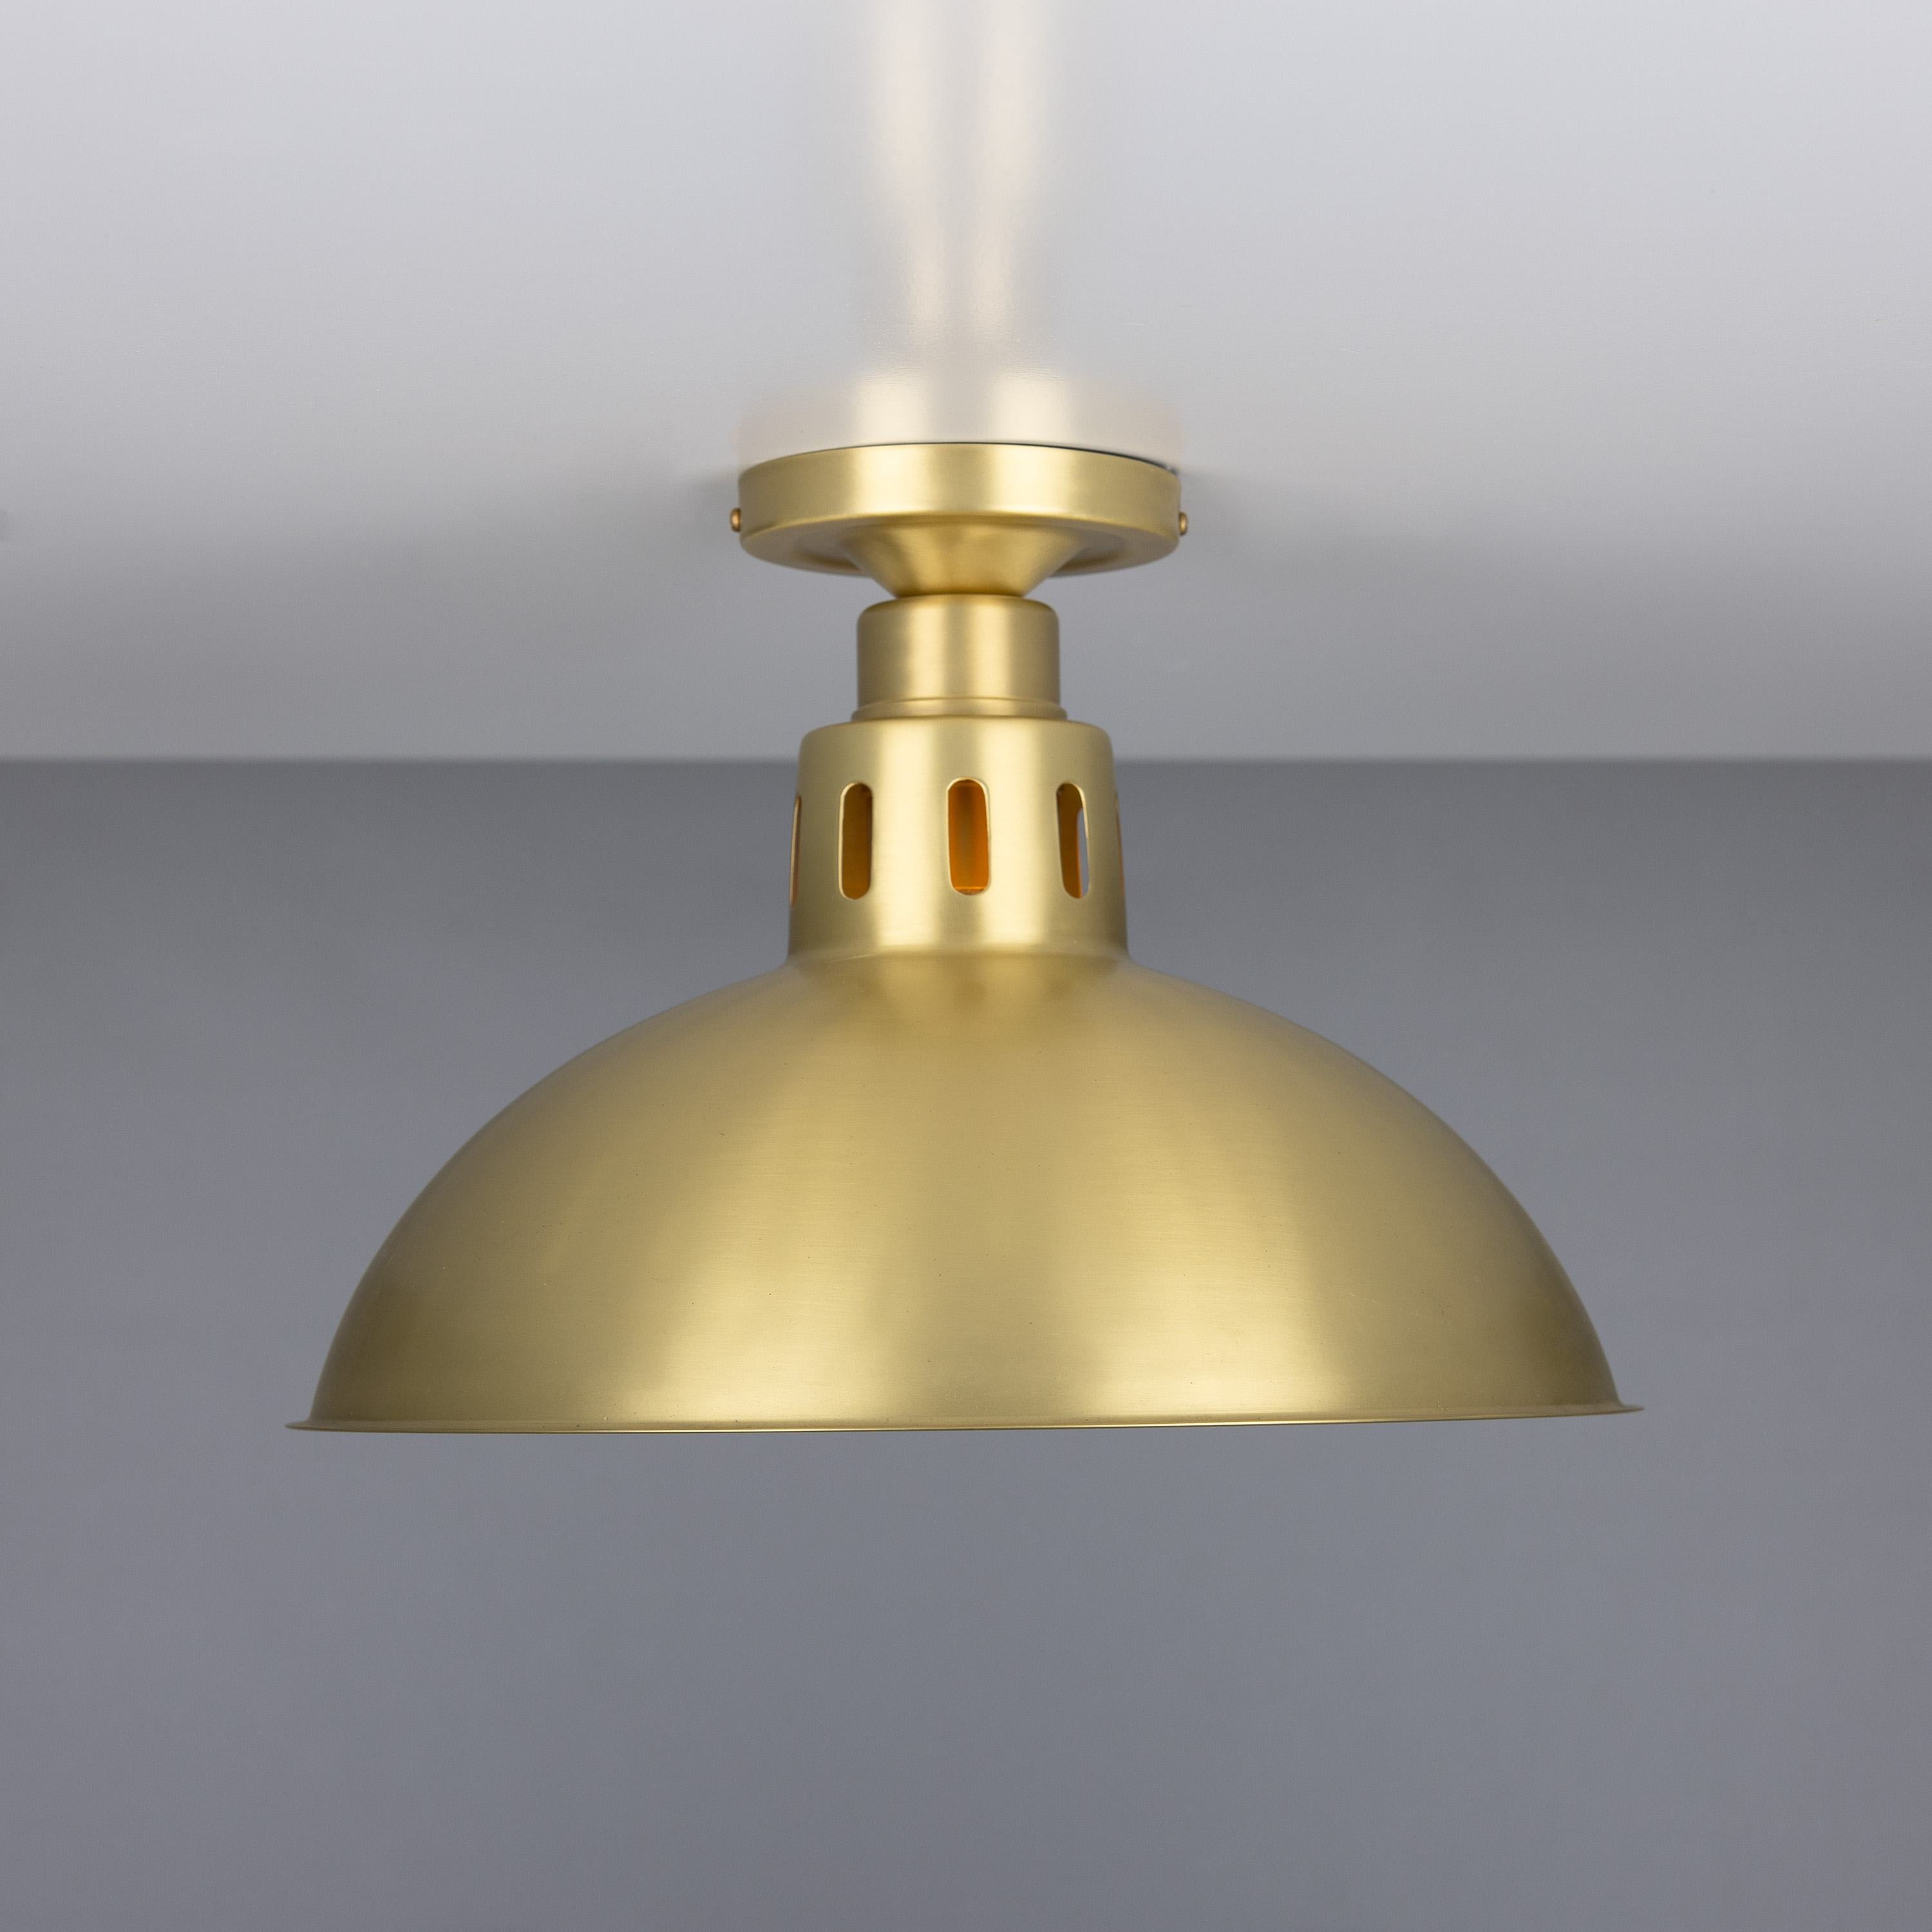 Paris Industrial Brass Ceiling Fitting